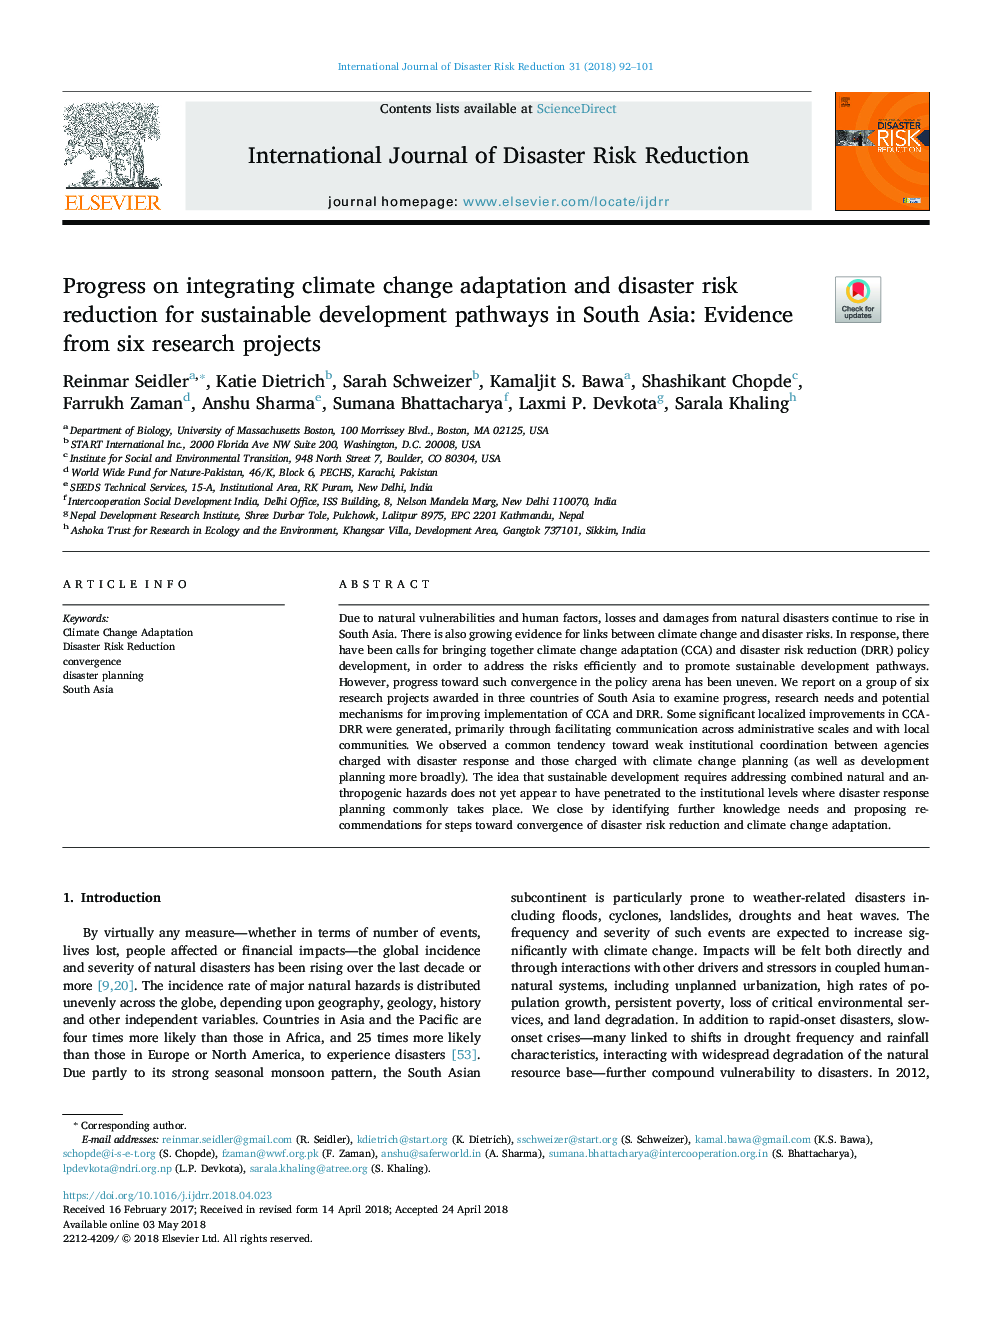 Progress on integrating climate change adaptation and disaster risk reduction for sustainable development pathways in South Asia: Evidence from six research projects